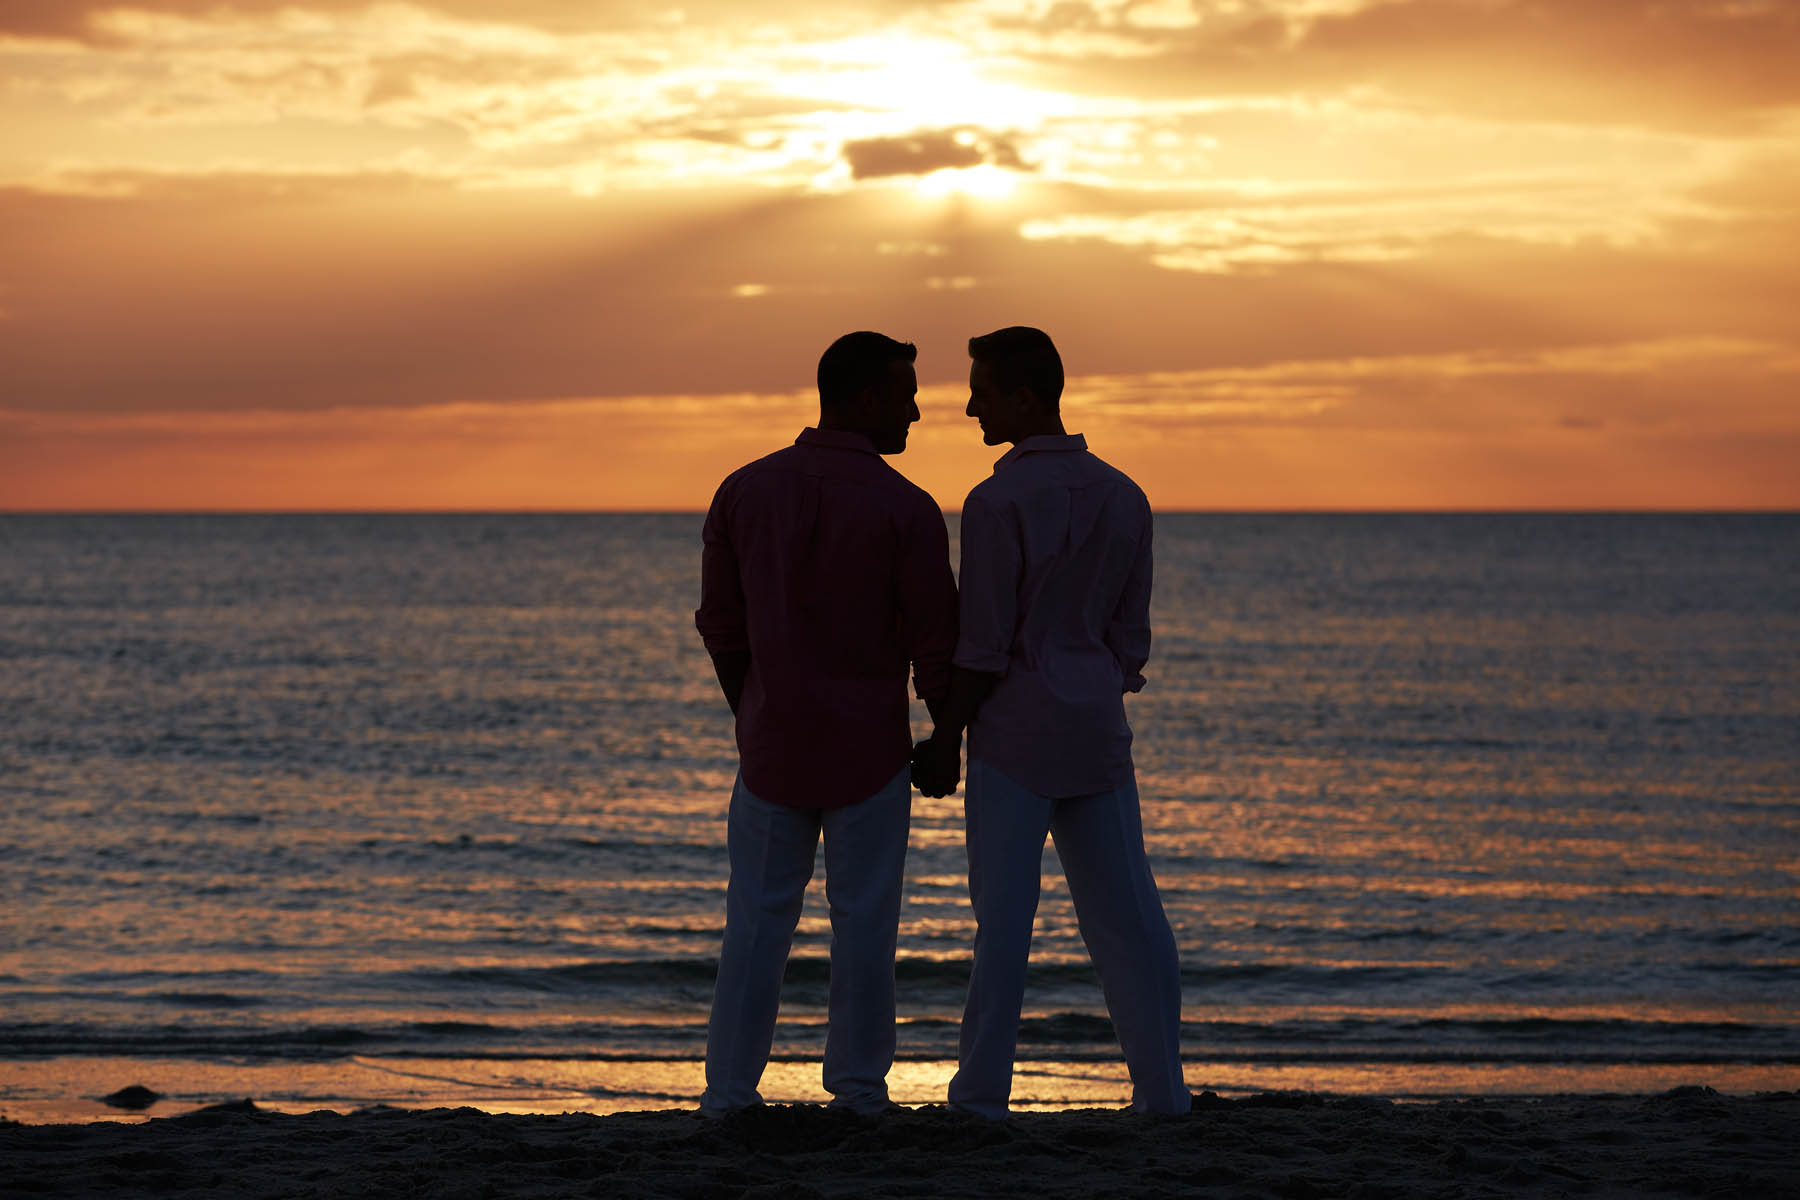 Two people stand, holding hands, against a sunset overlooking the ocean.